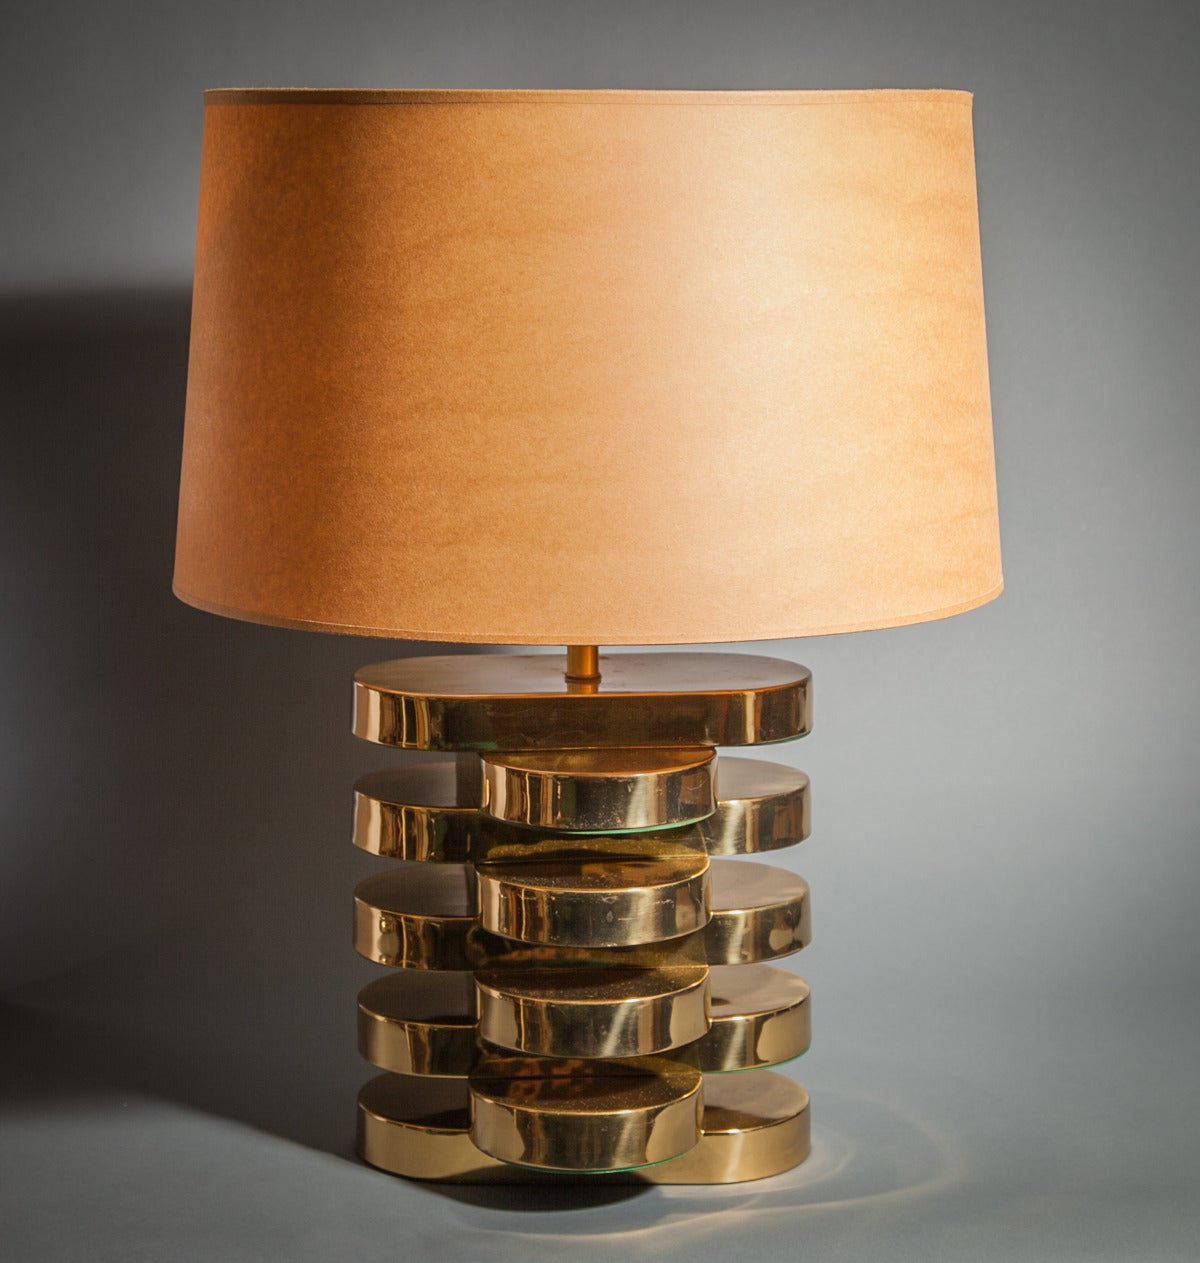 Karl Springer style brass lamp.
(Shade shown is 19 inches diameter.)